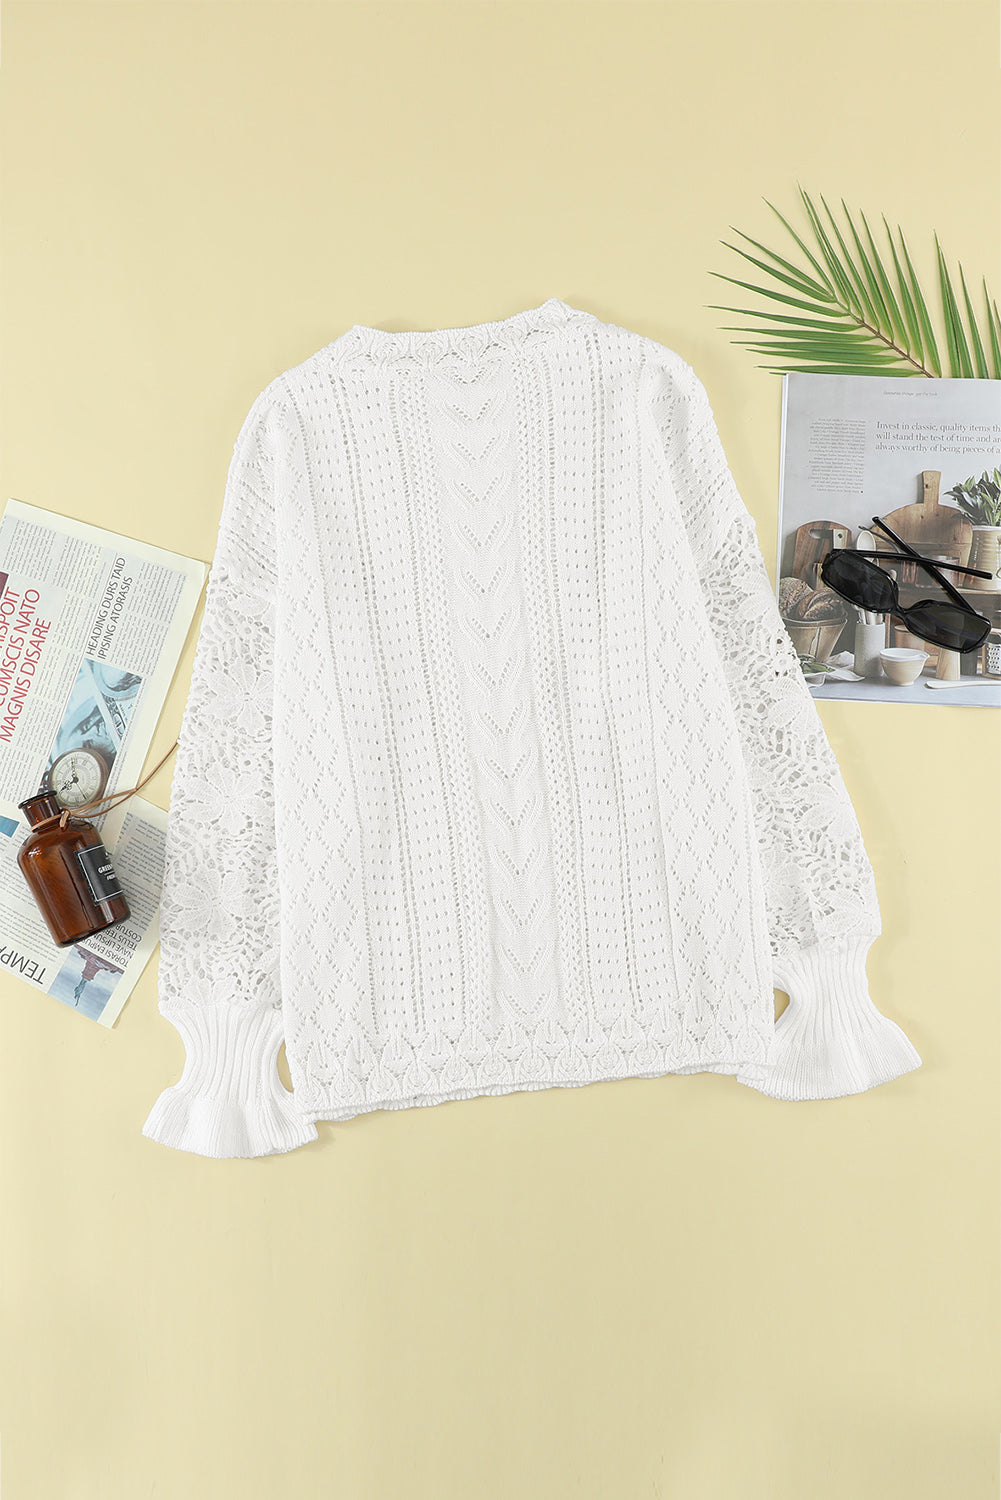 Chic White Crochet Lace Pointelle Knit Sweater